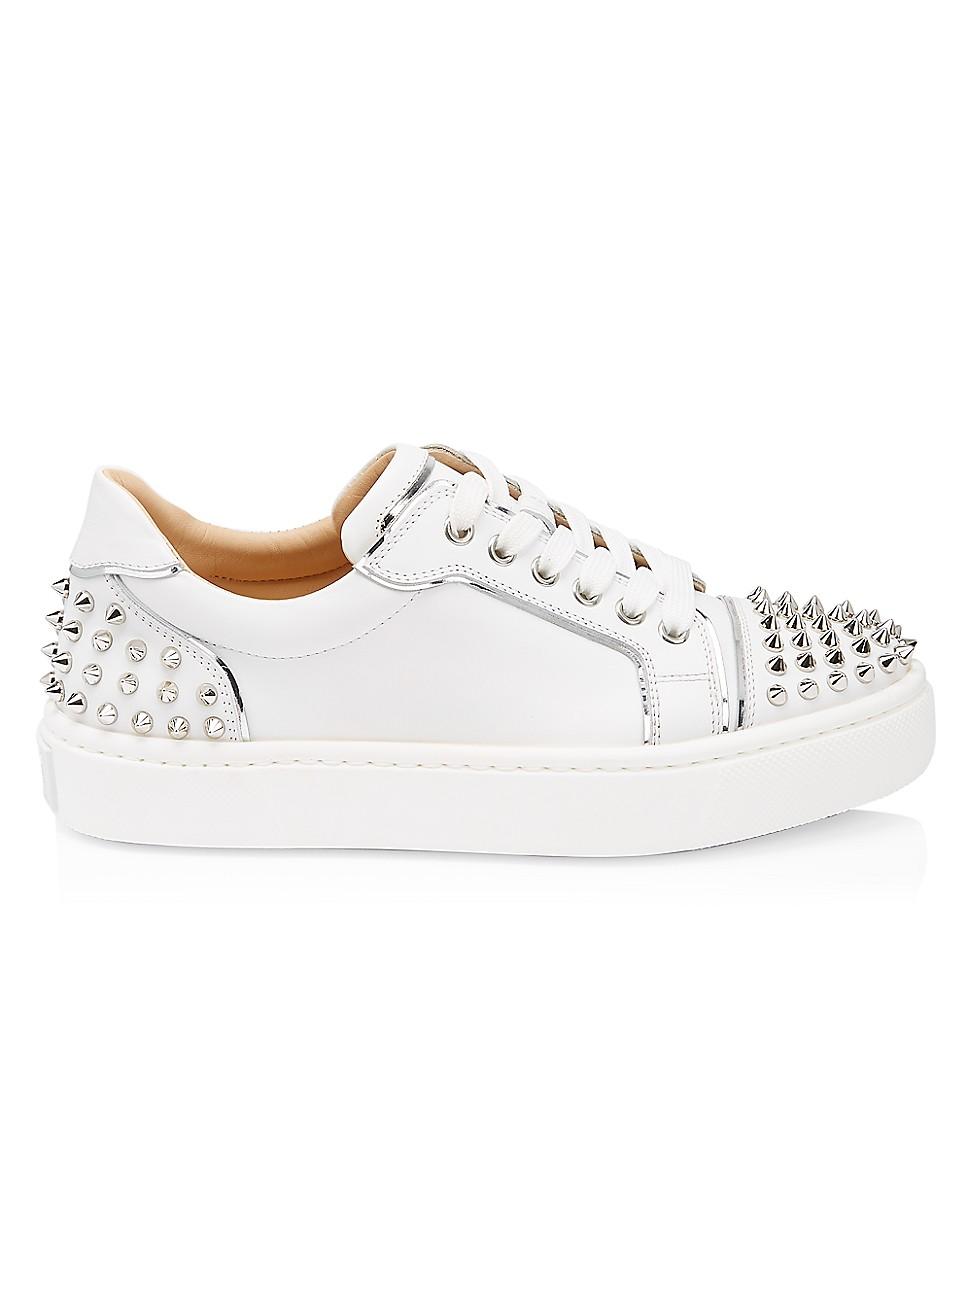 Christian Louboutin Leather Happyrui Spikes Flat Calf in White - Lyst